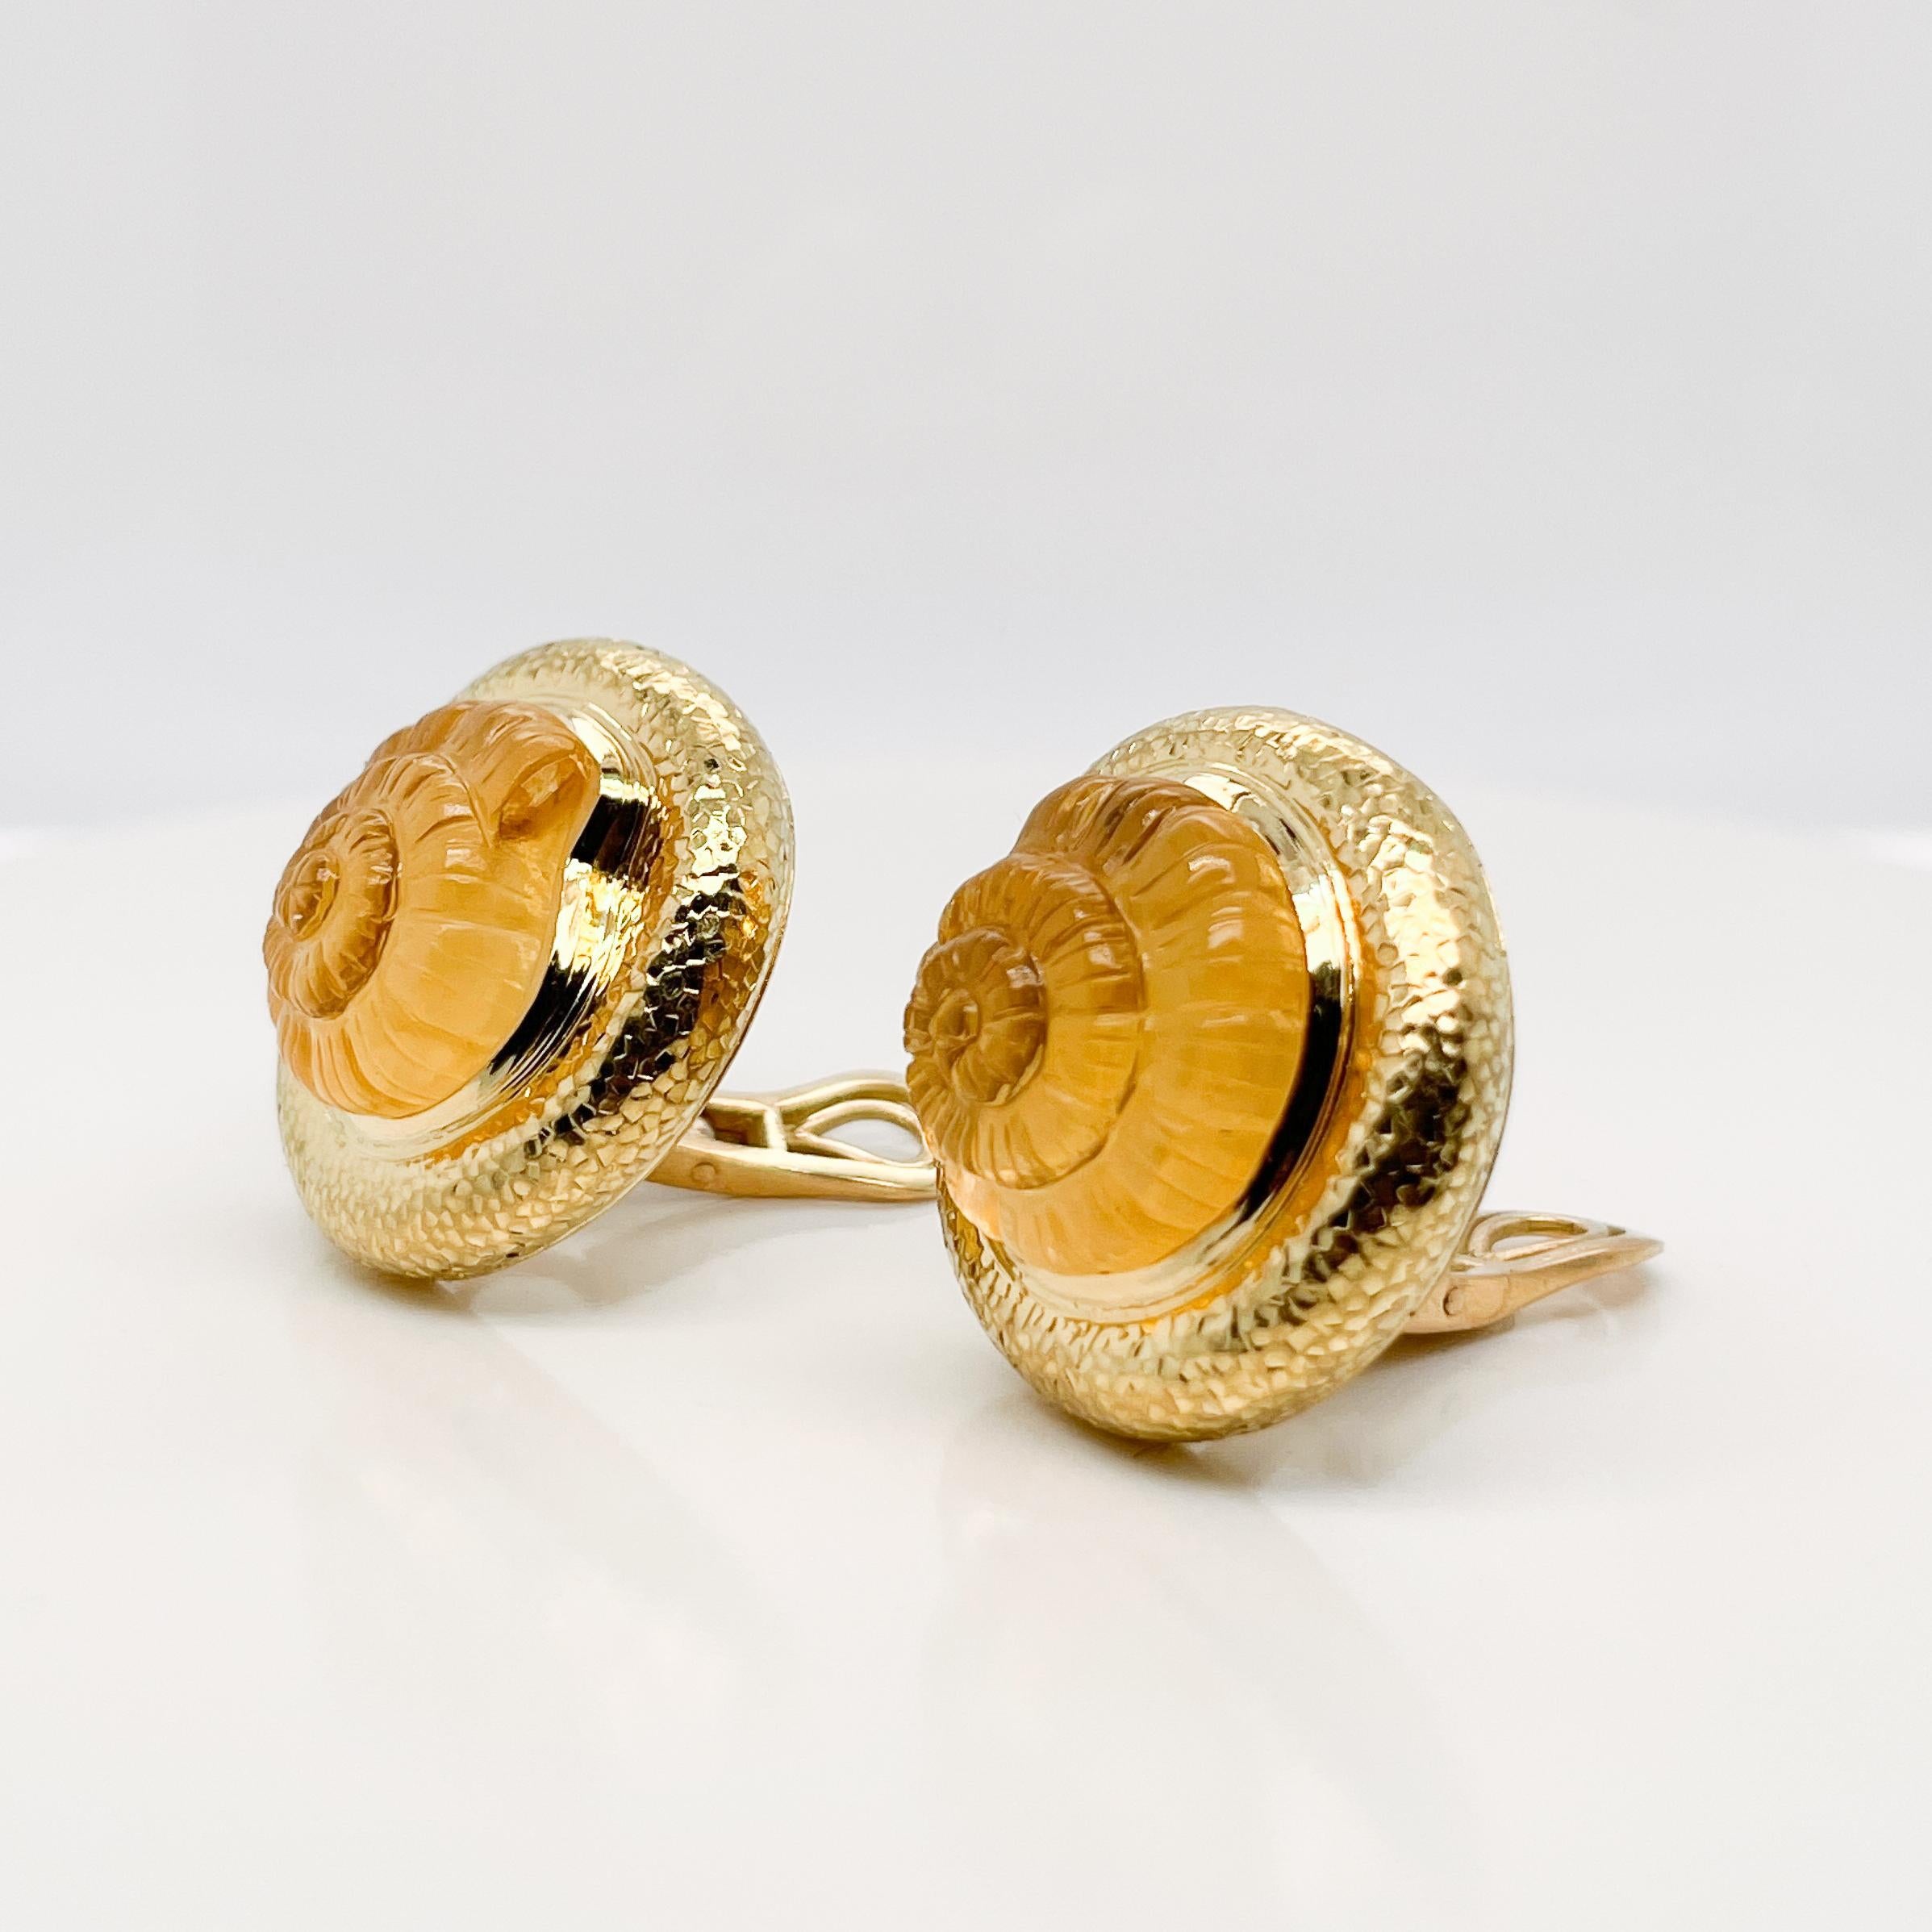 A very fine pair of Elizabeth Gage nautilus earrings.

Each with a carved citrine nautilus set on top of mother of pearl disc and framed in hammered 18k gold.

Simply a great pair of clip-on earrings from one of the world's top jewelry